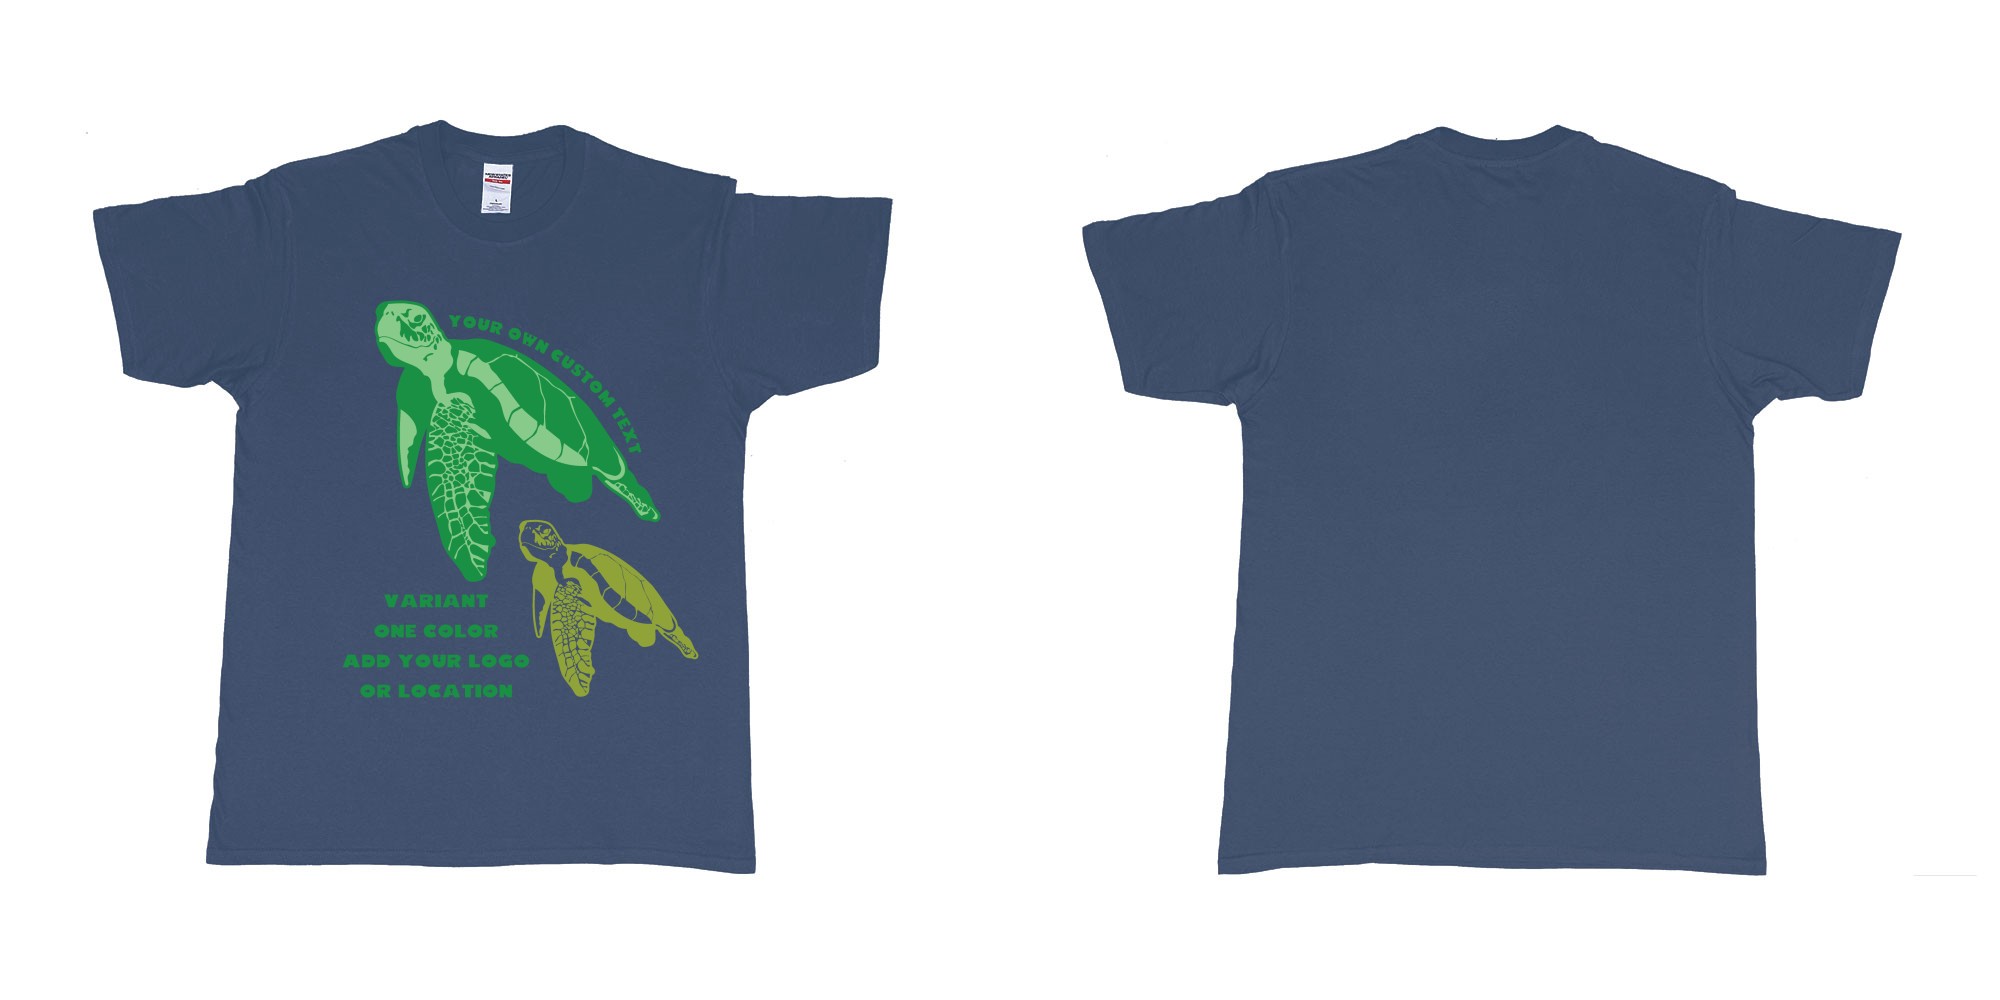 Custom tshirt design hawksbill green sea turtle chilling add logo in fabric color navy choice your own text made in Bali by The Pirate Way